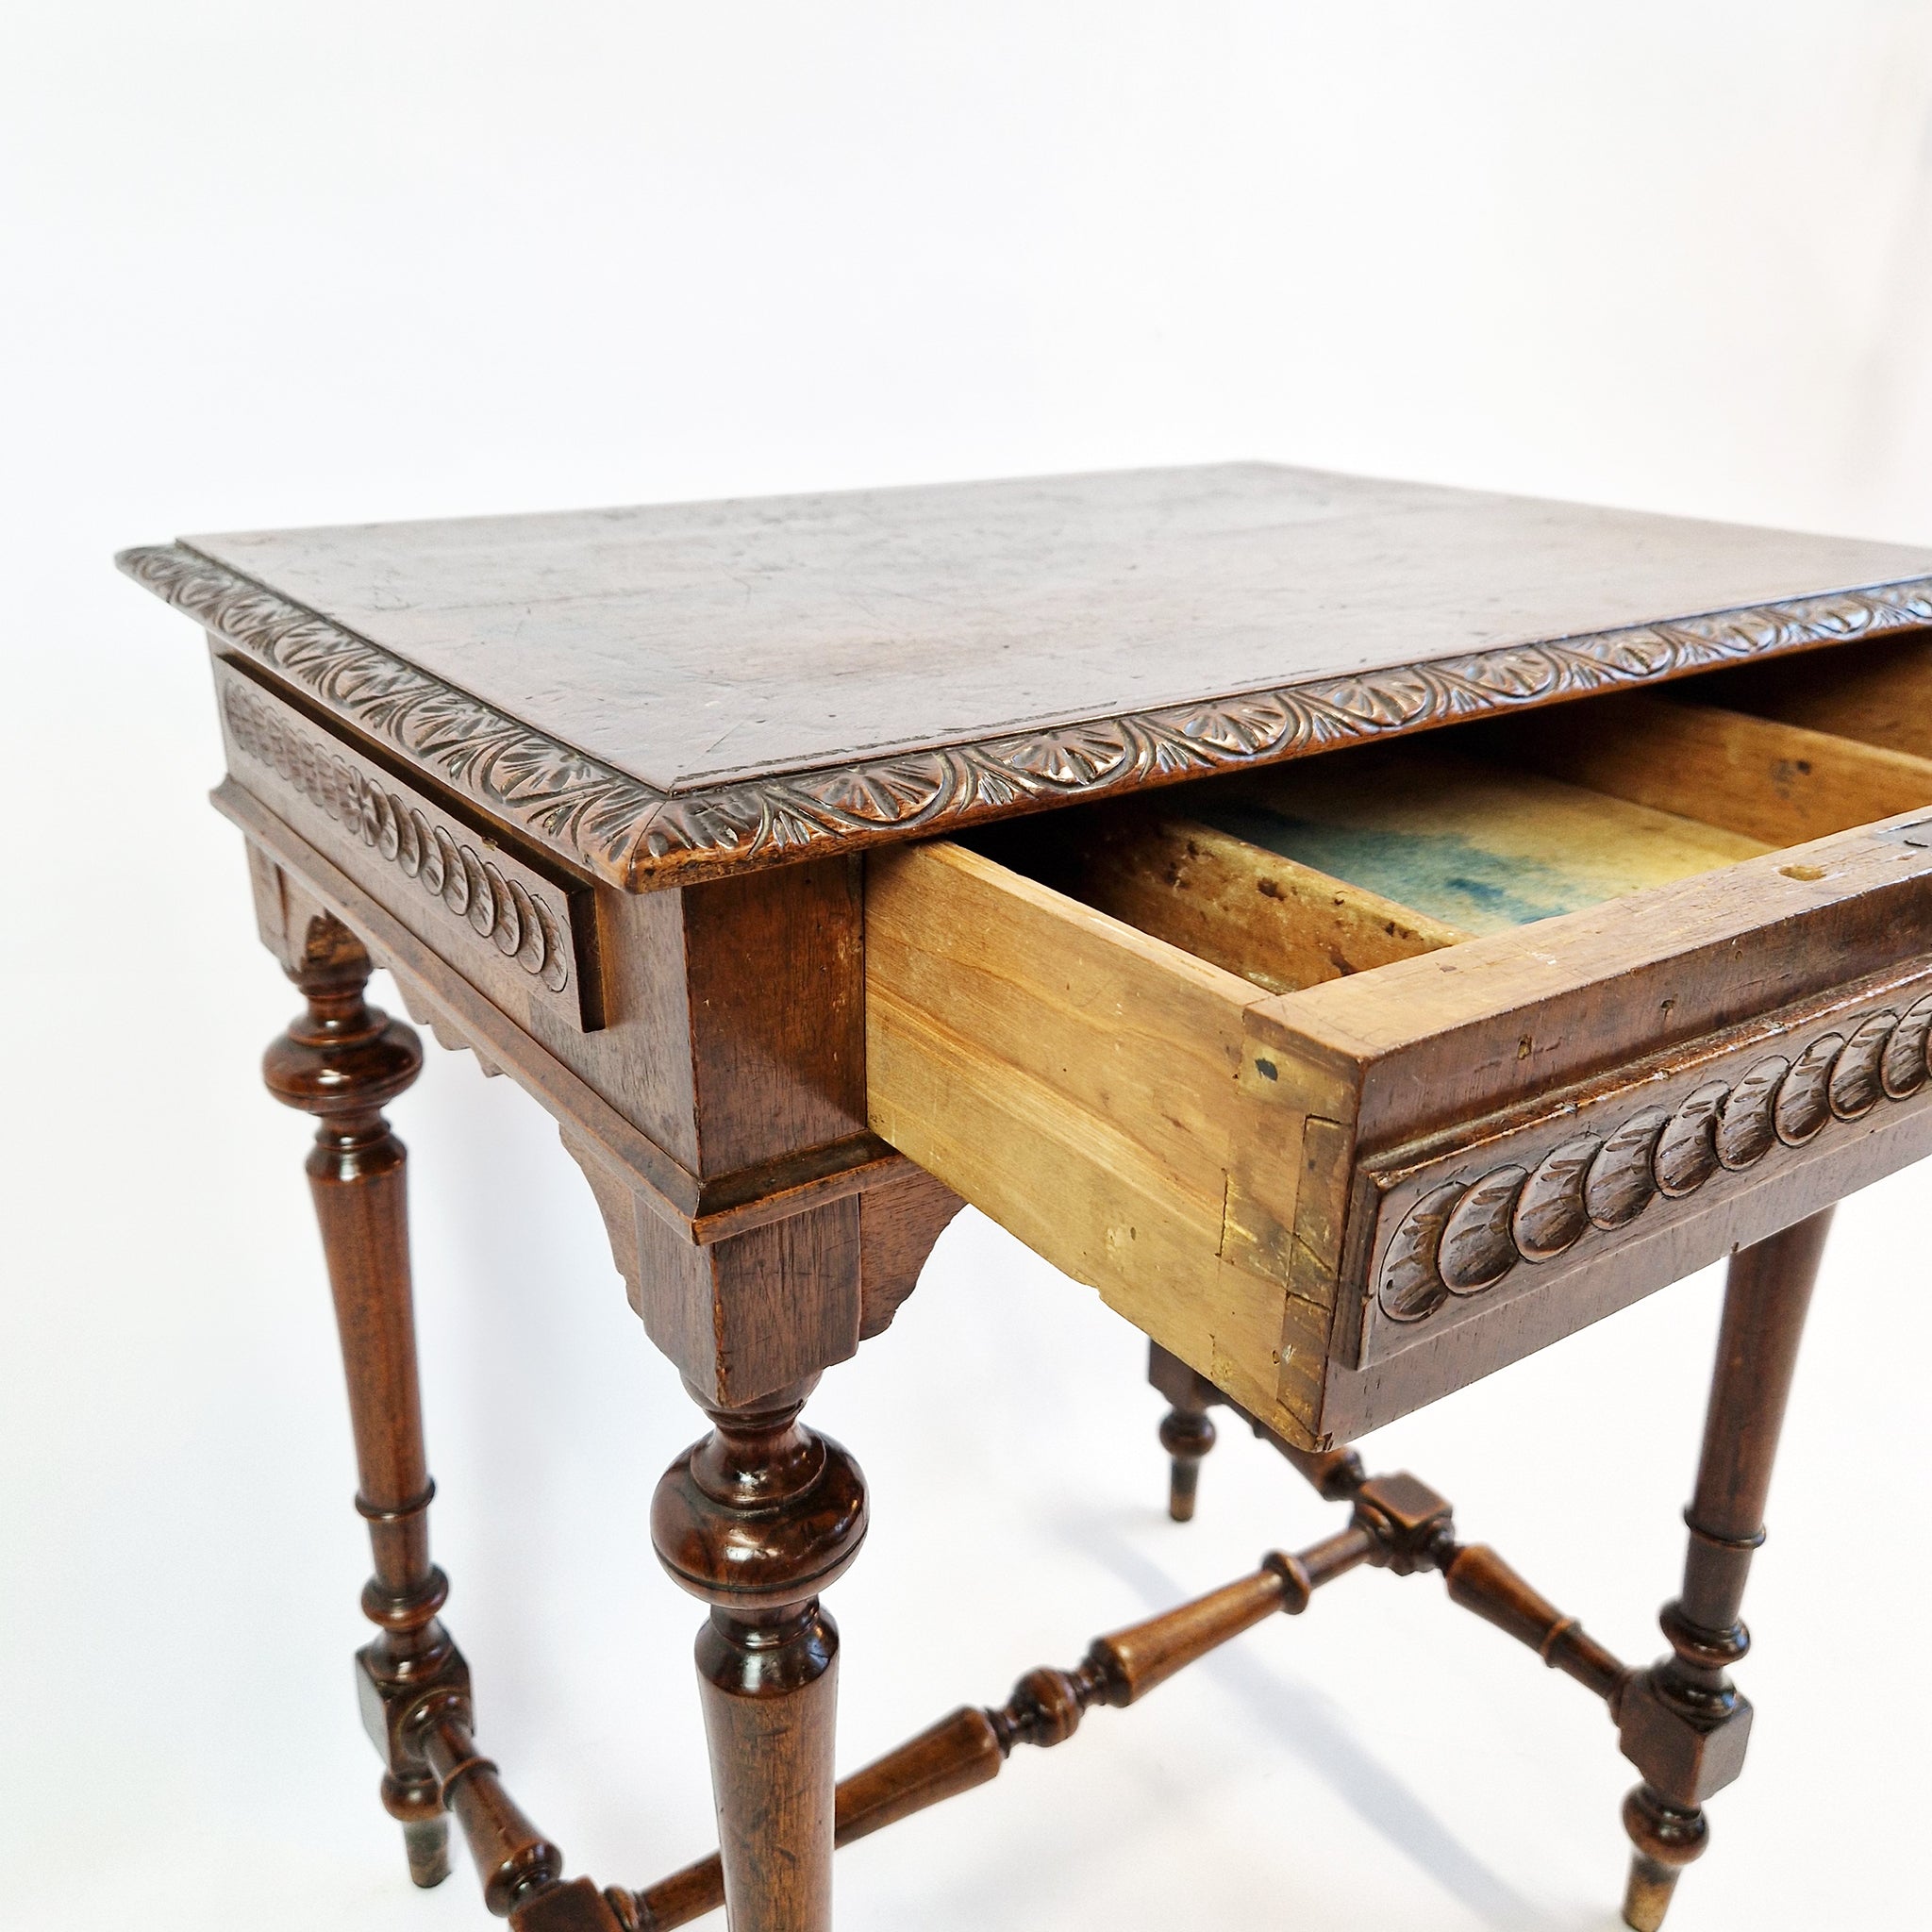 Italian side table in Renaissance revival style